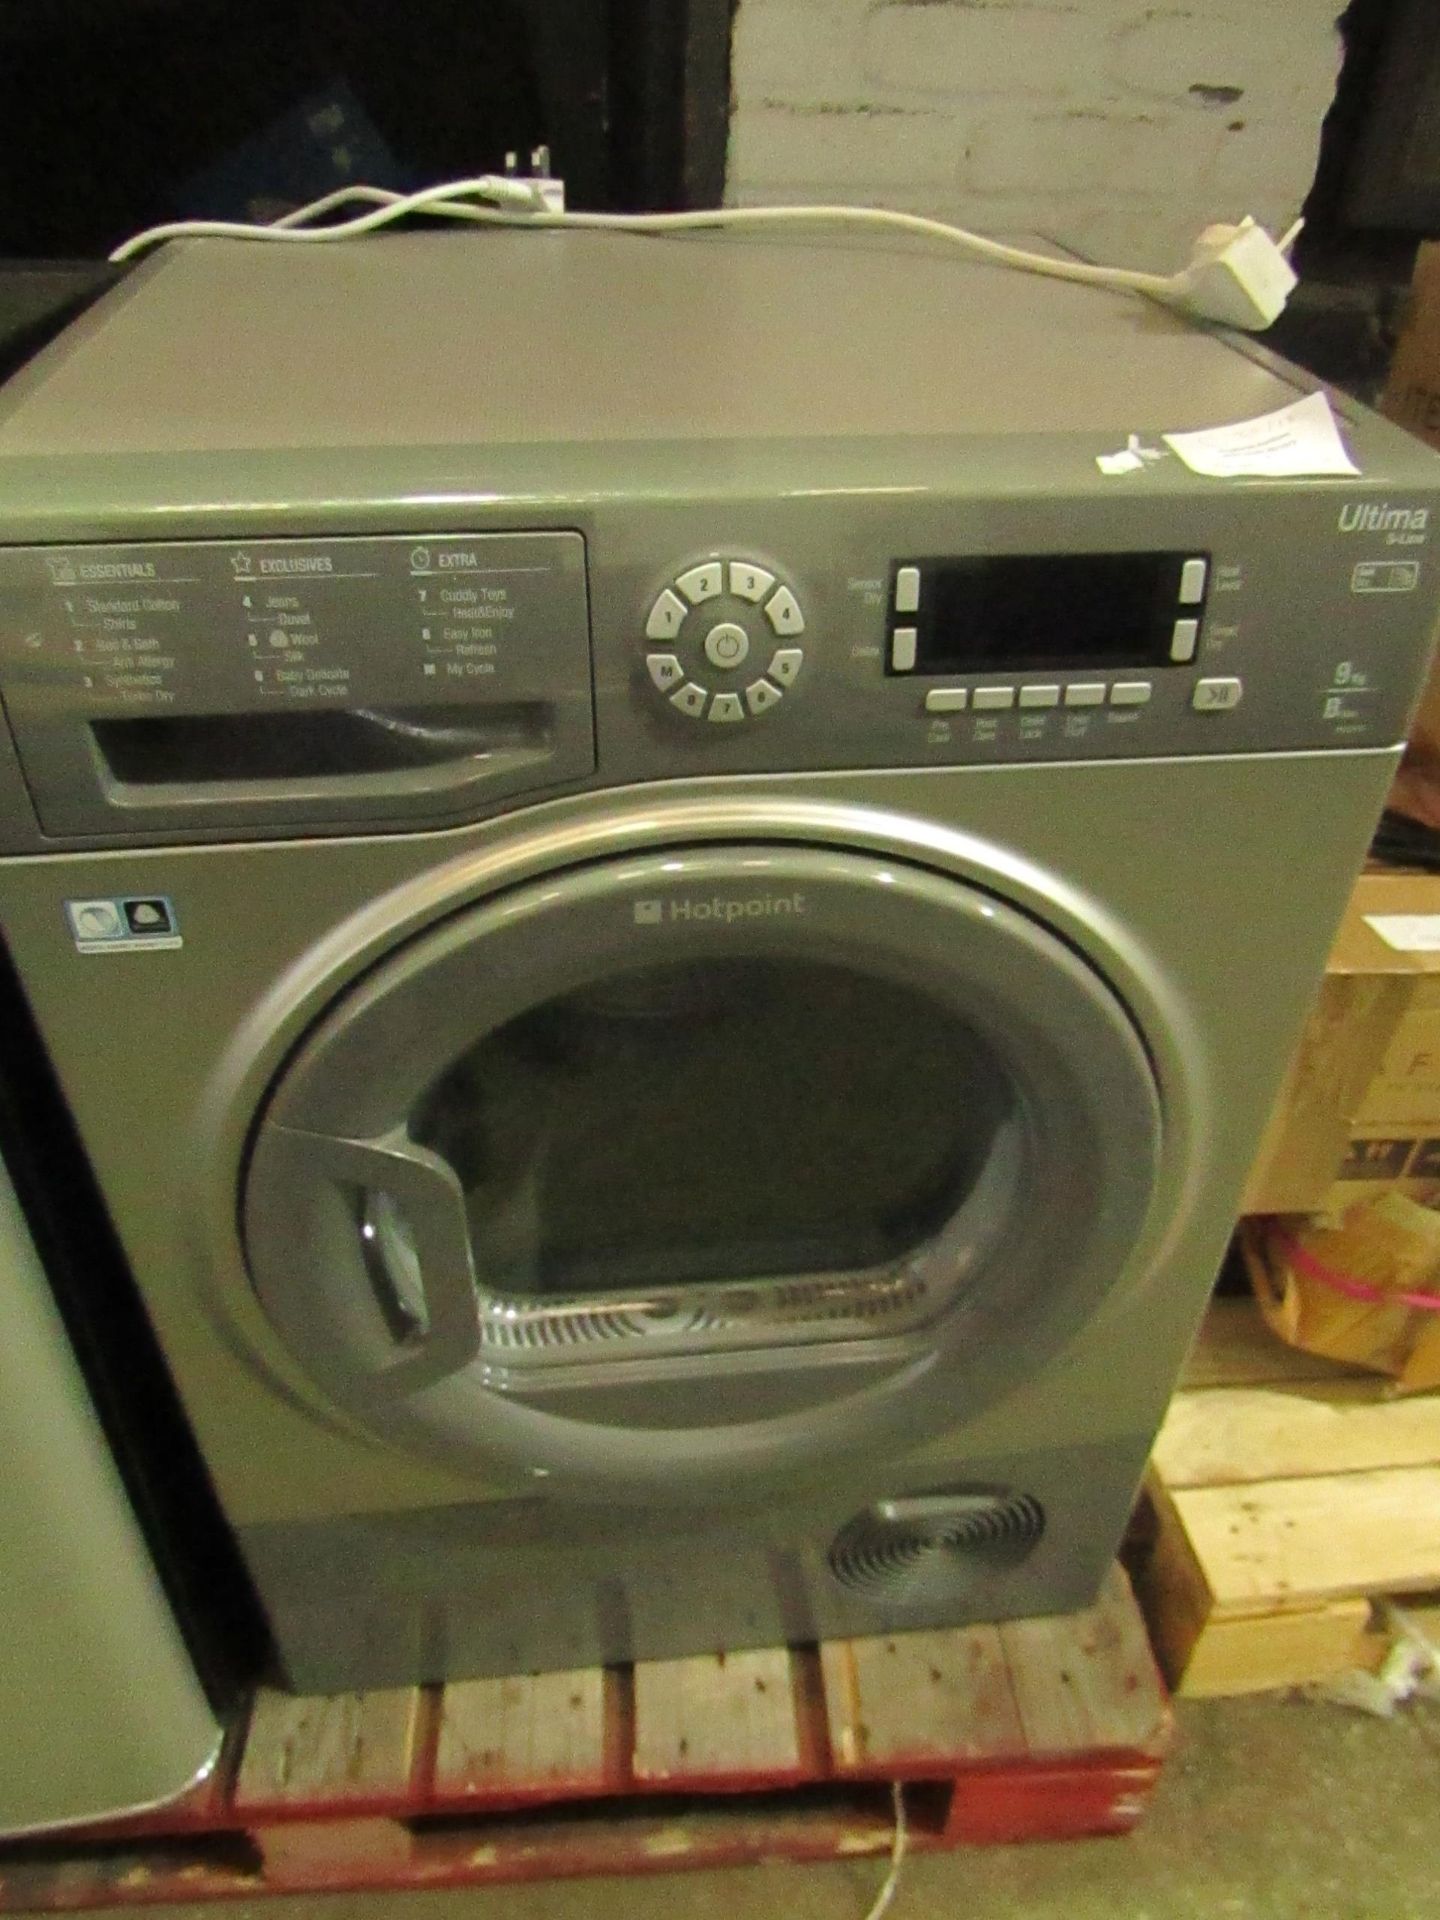 Hotpoint - Ultima S-Line Condenser Dryer -Tested Working for heat and drum turning.